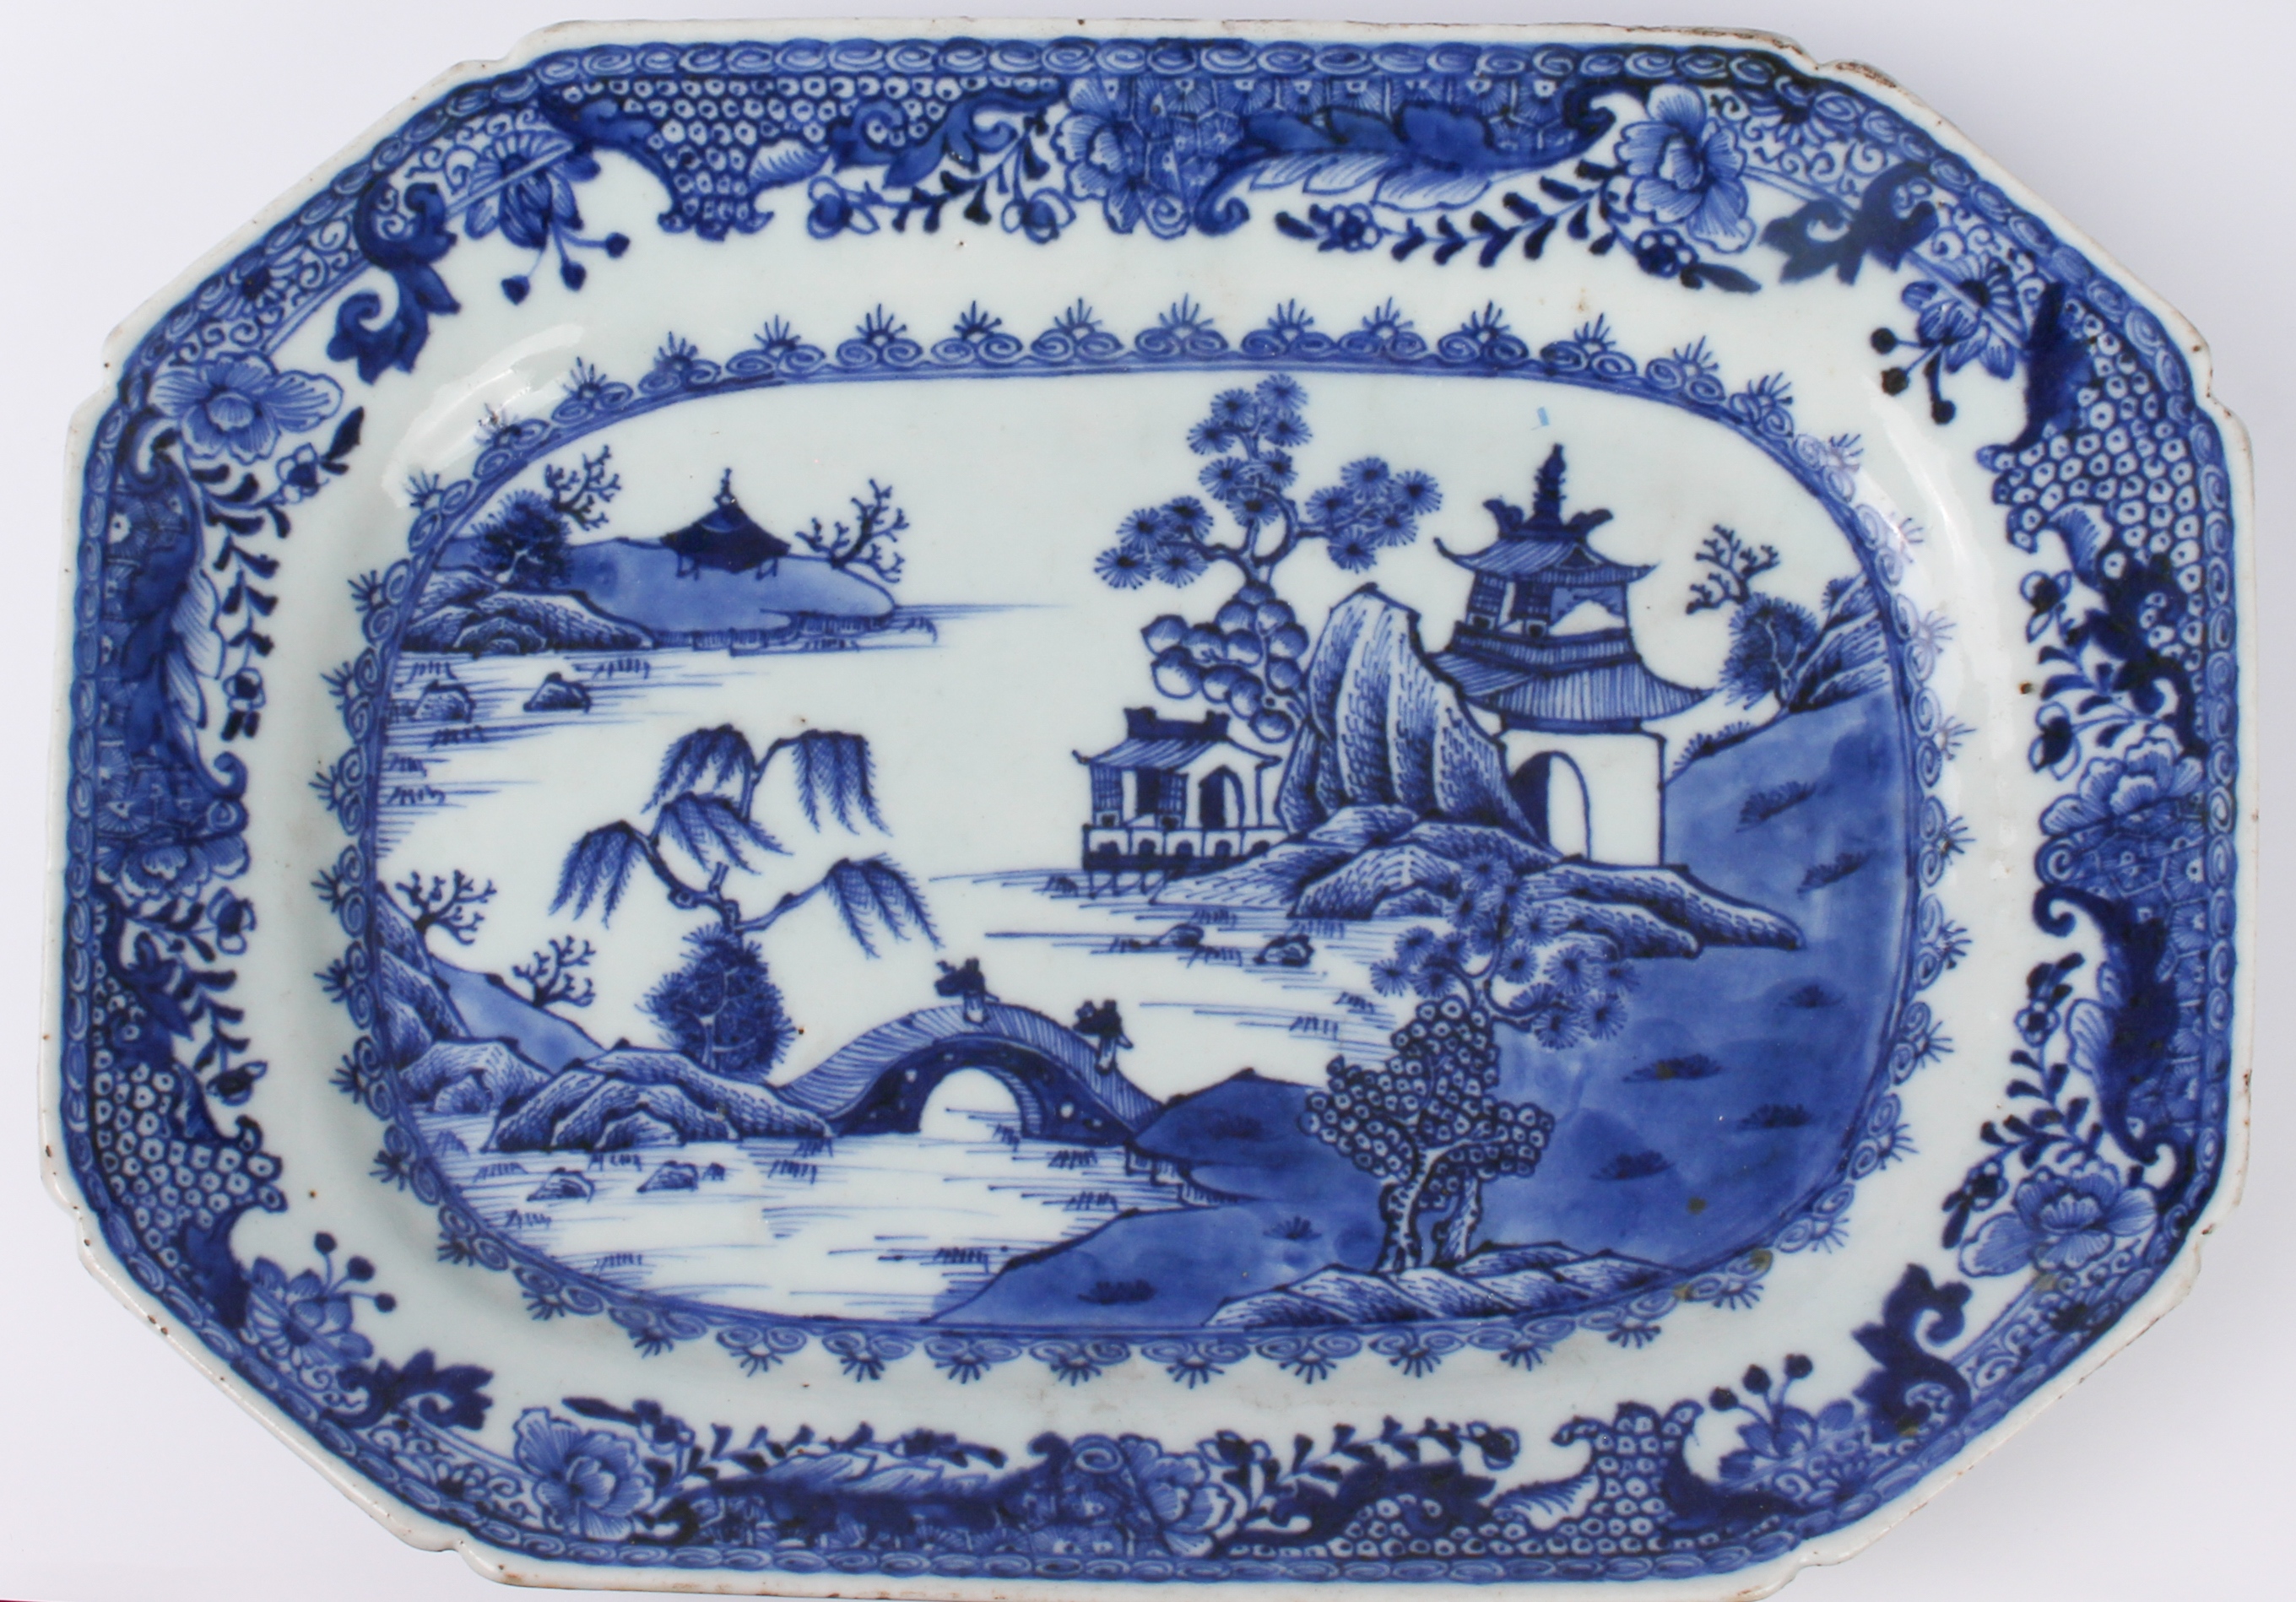 Eight Chinese export porcelain blue and white plates and octagonal platters - late 18th / early 19th - Image 12 of 31